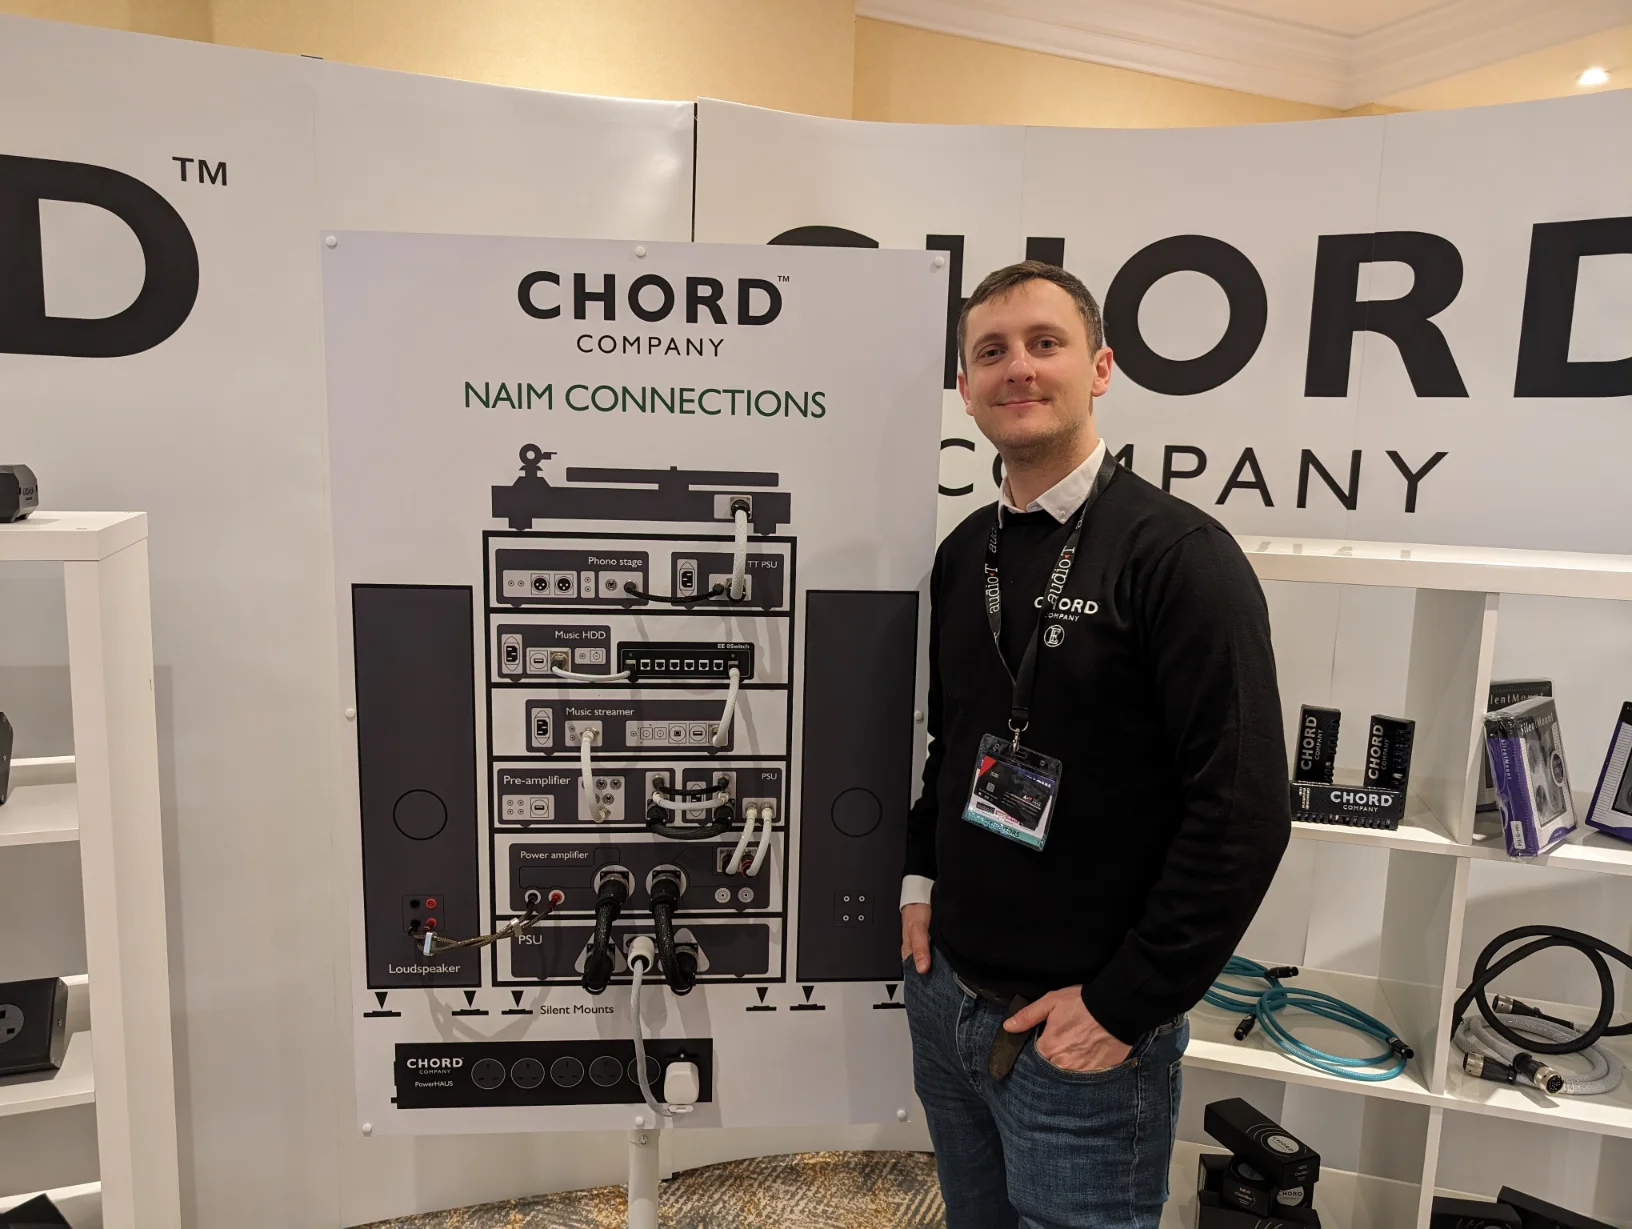 Doug presenting the new Chord Company connections display, simple but effective. A bit like the man himself ;)